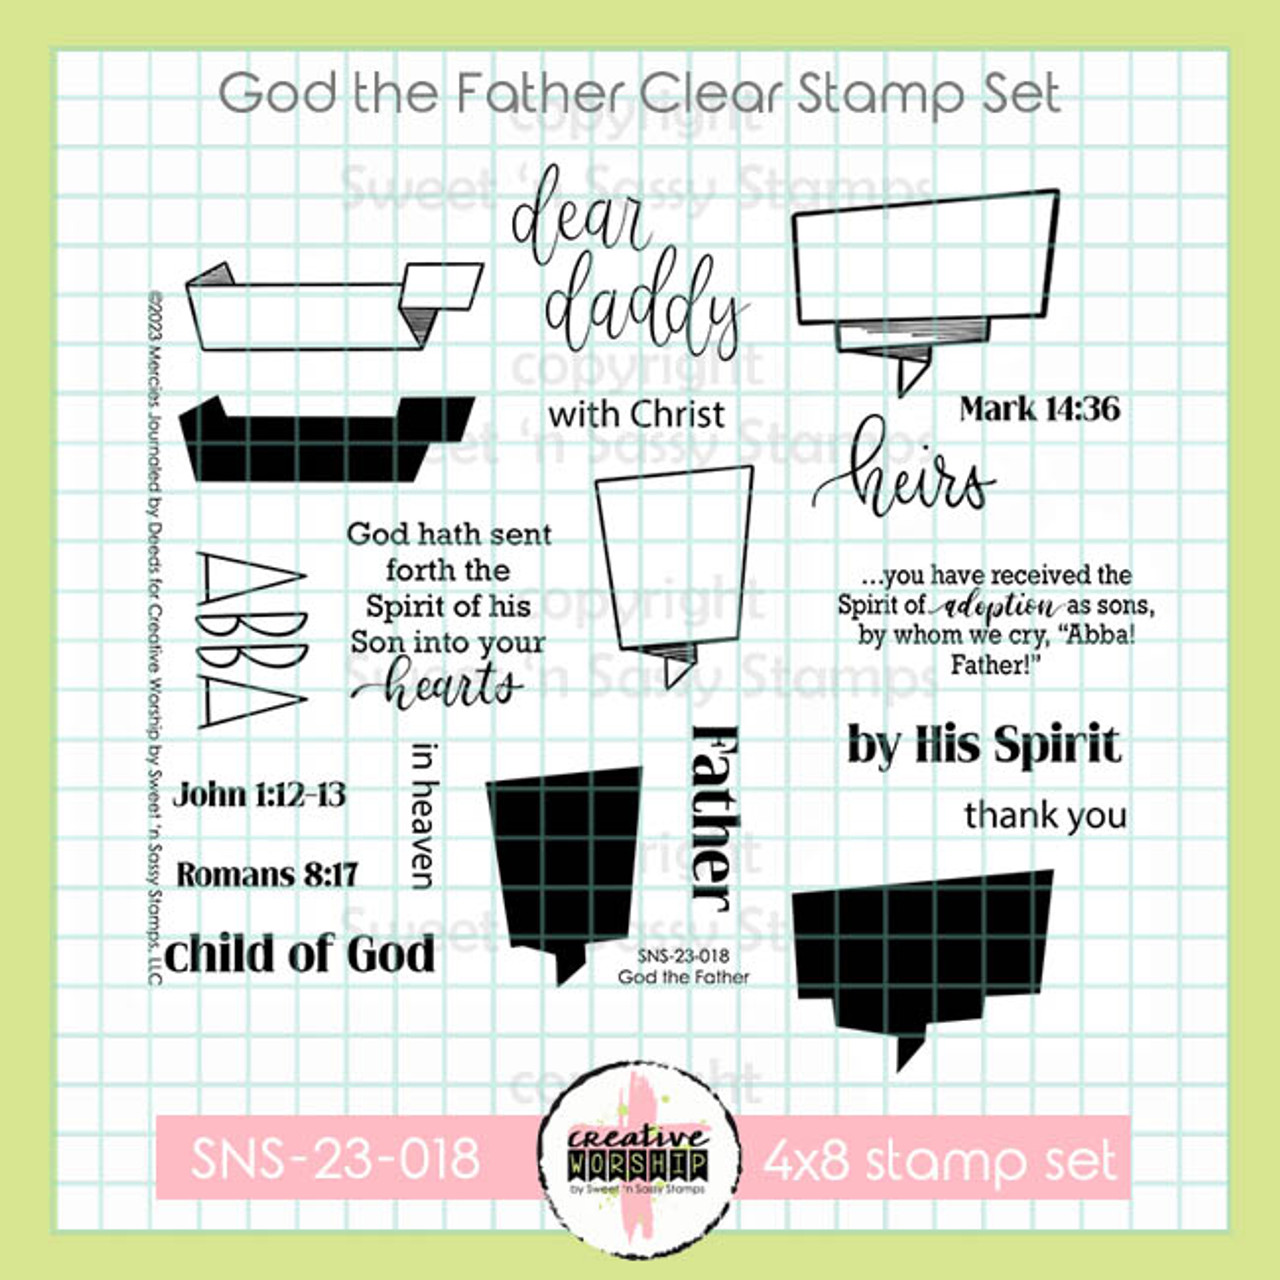 SnSS God the Father Stamp Set